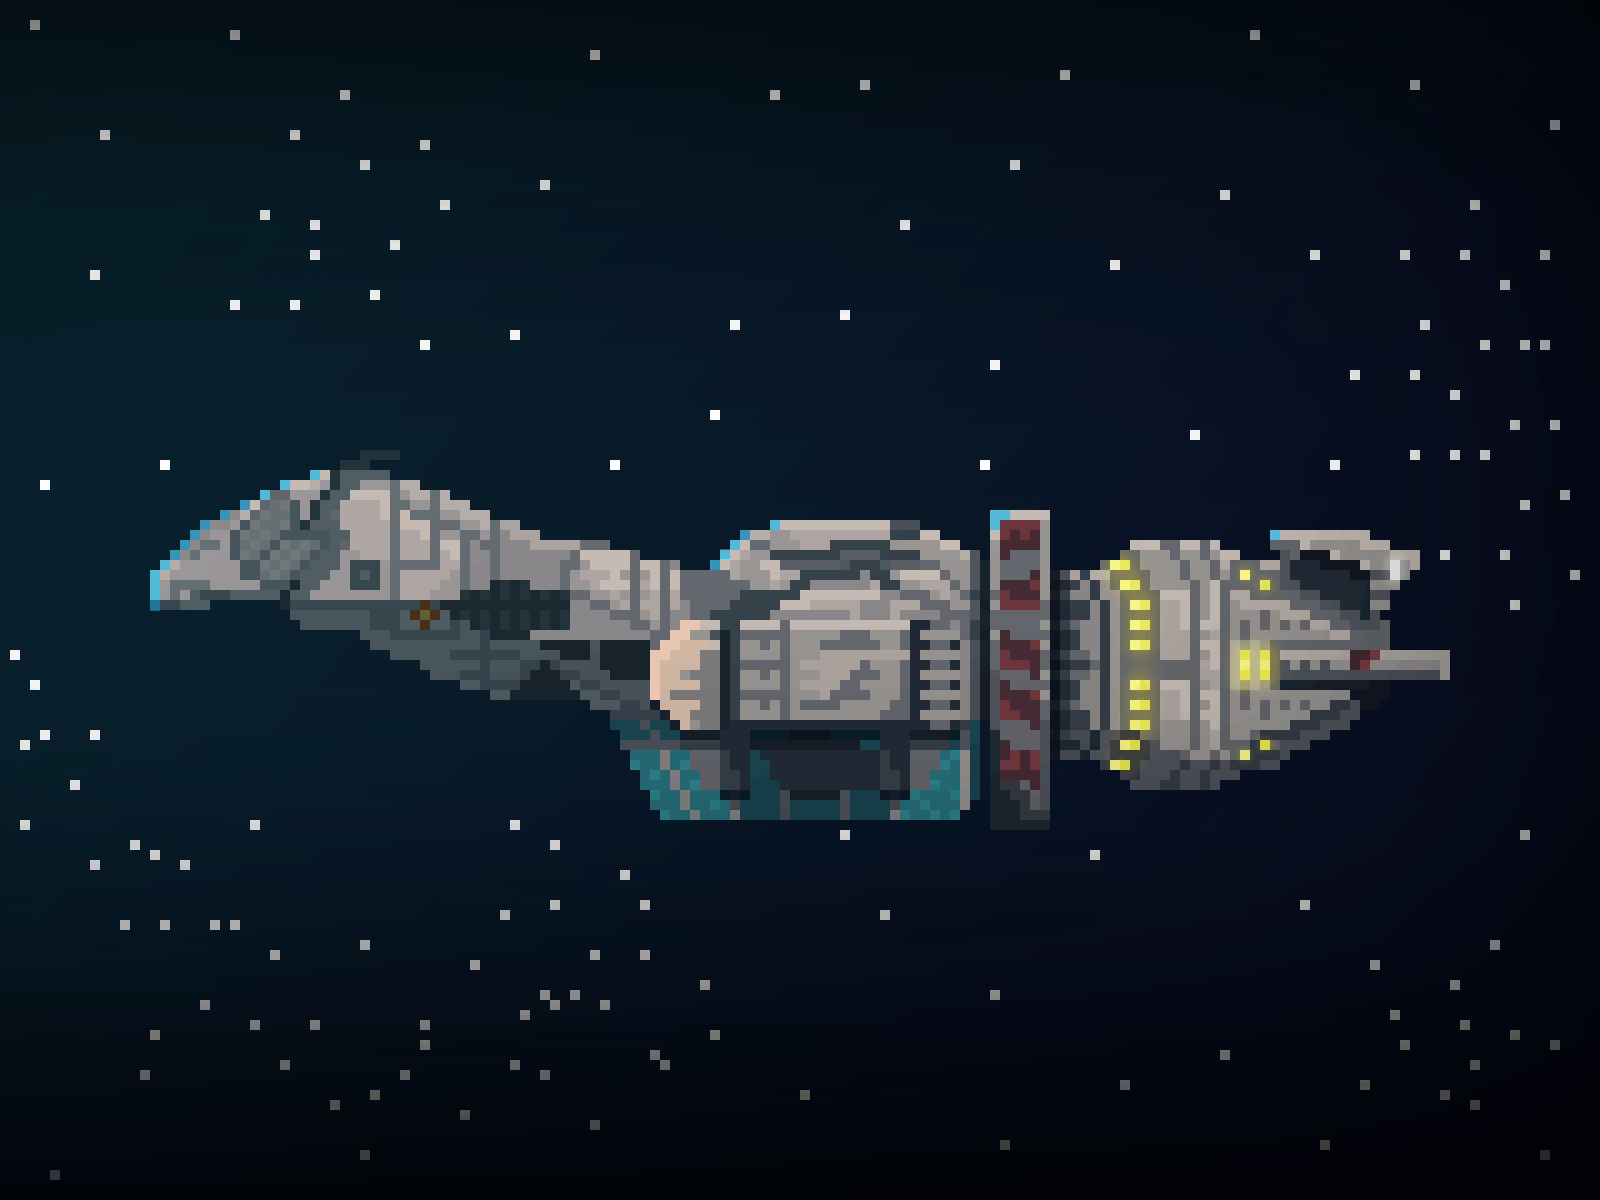 Serenity from Firefly [Pixel Art] animated animation firefly gif movies pixel pixel art pixelart serenity ship space tv tv show